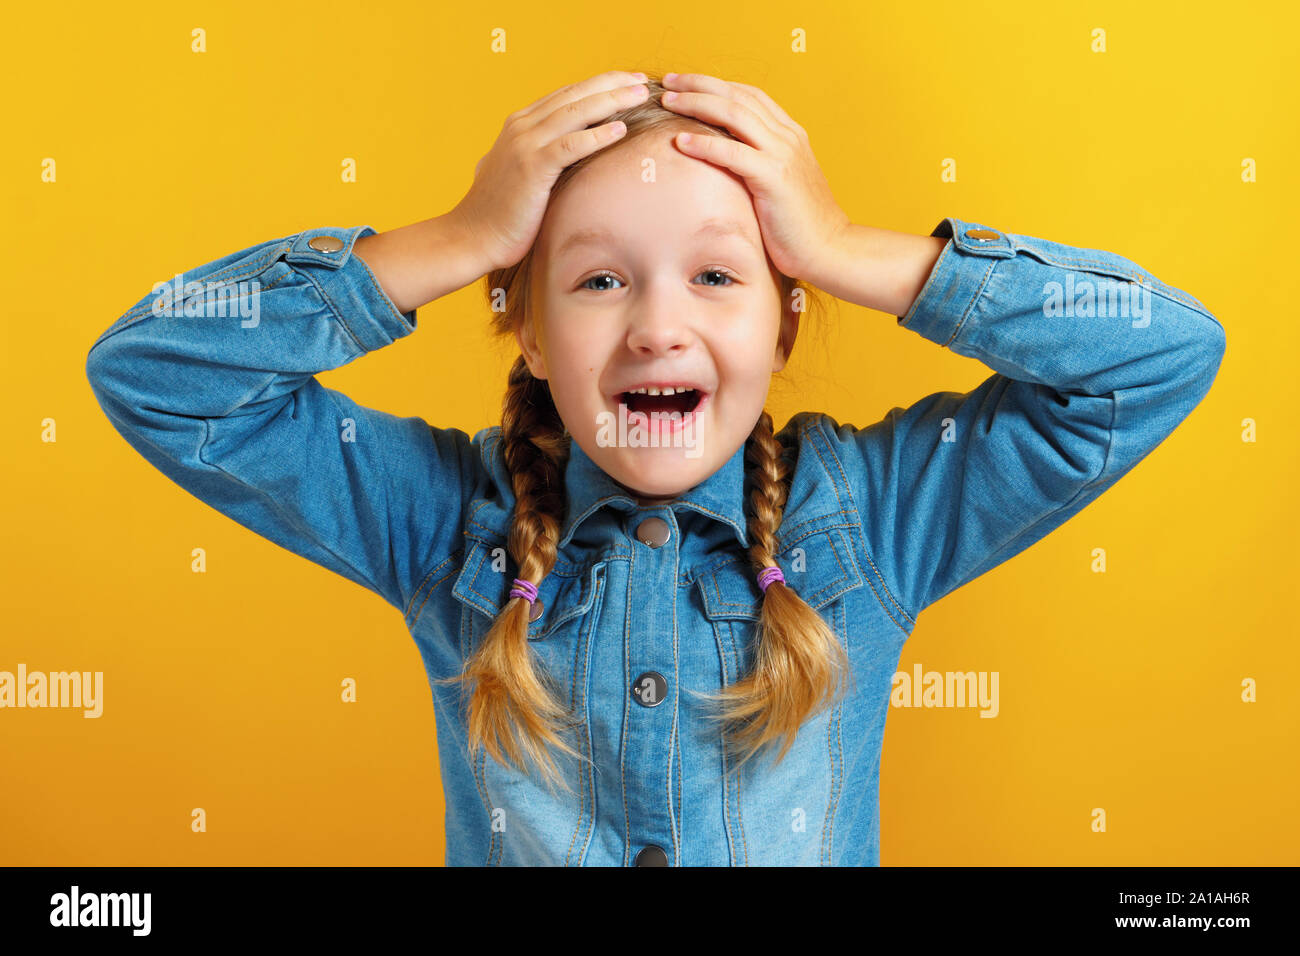 Little girl holds hands behind her head on a yellow background. The child is amazed, surprised, emotional. Stock Photo